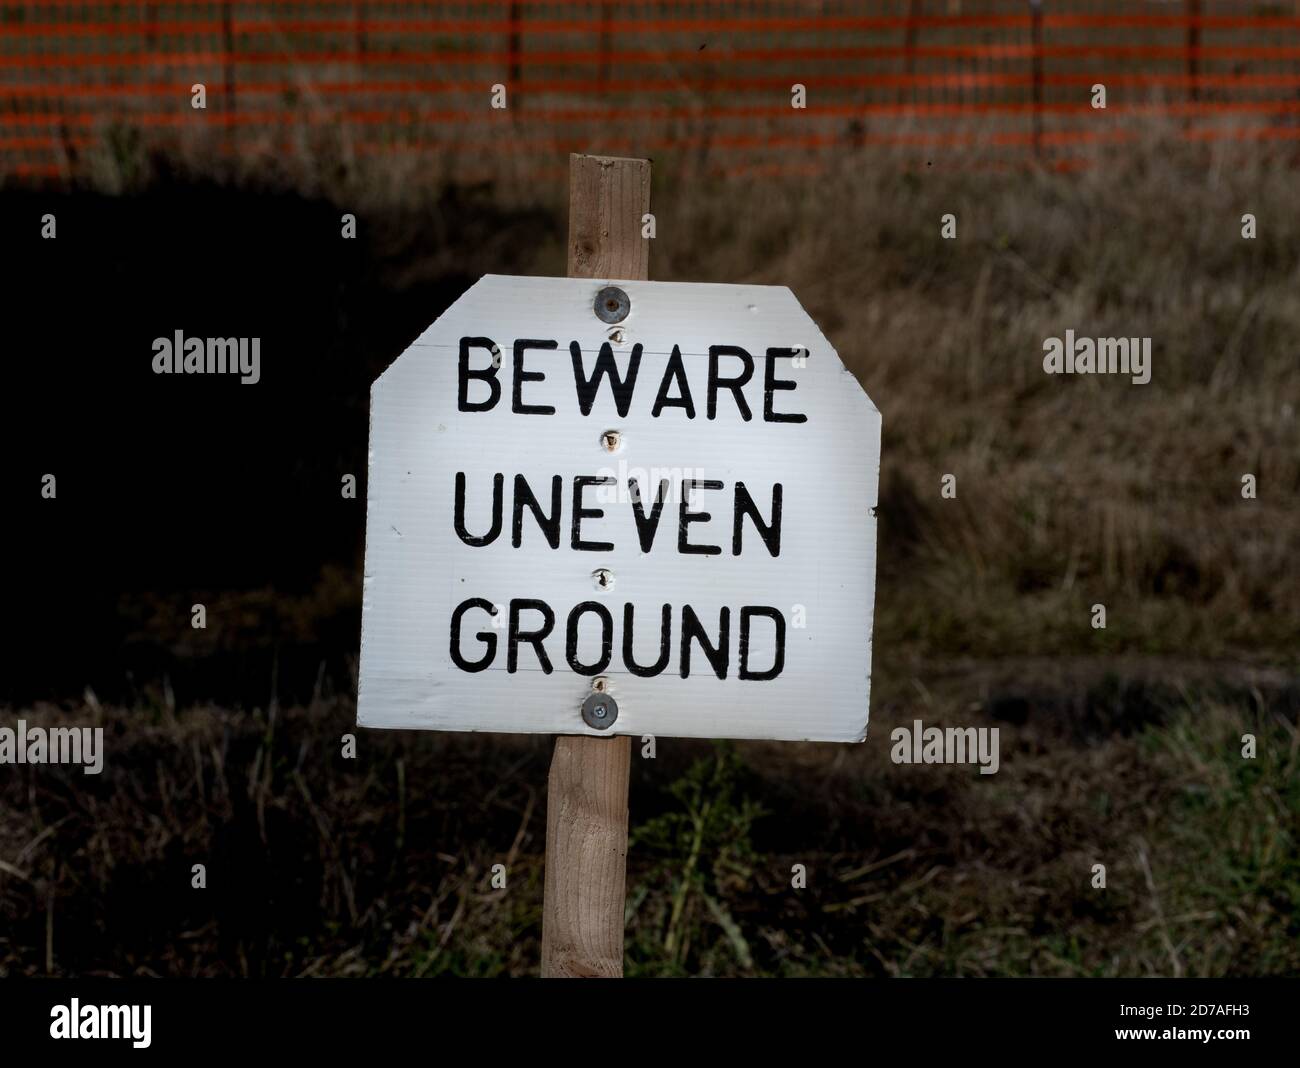 Sign warning of uneven ground Stock Photo